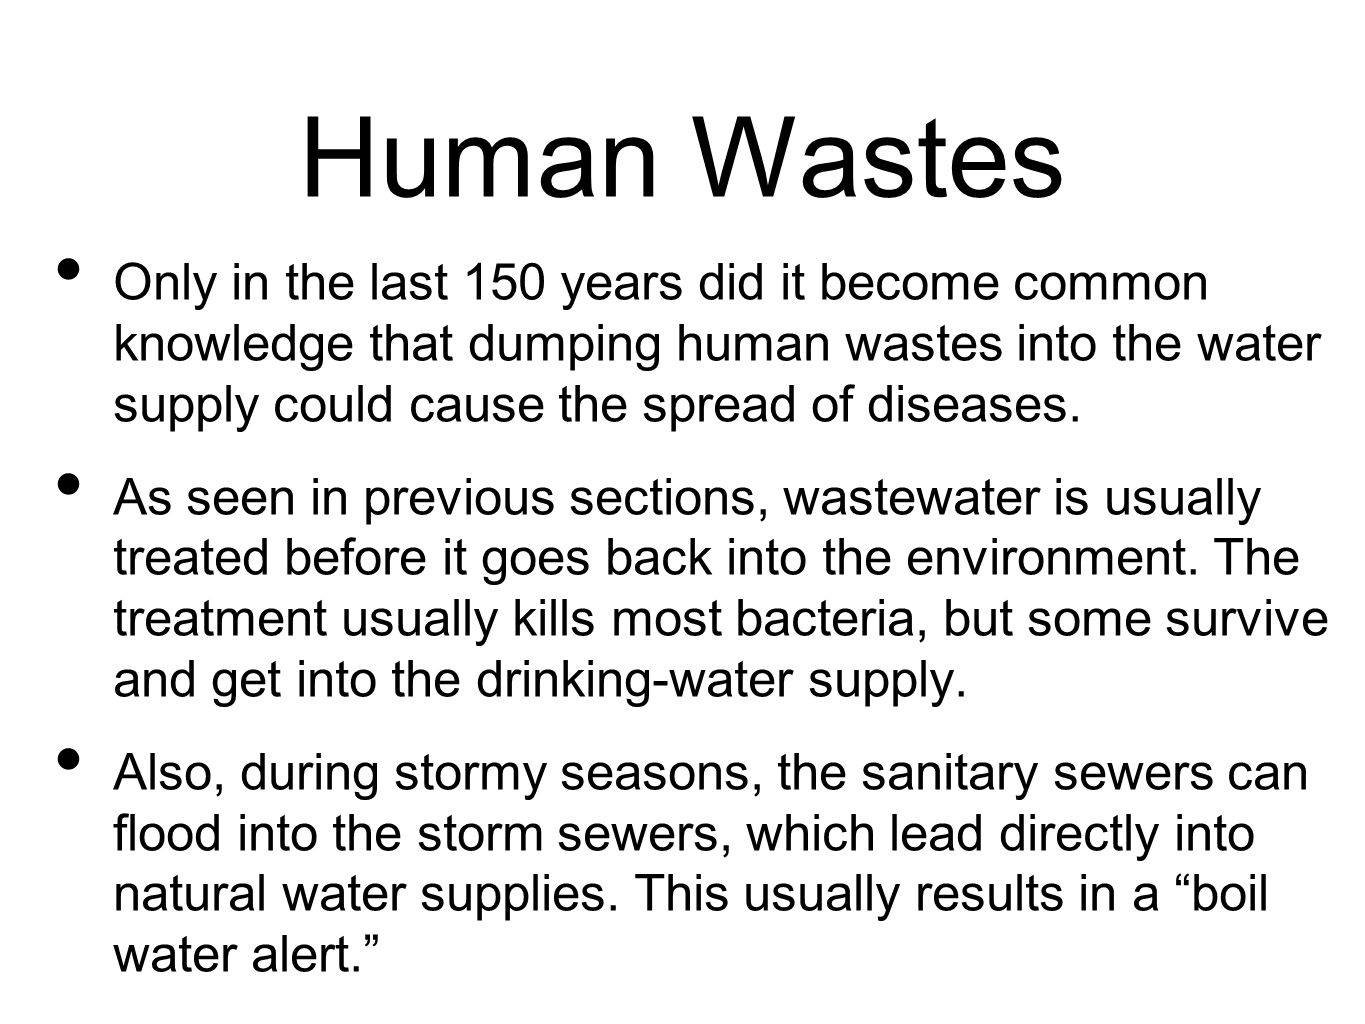 Human Wastes Only in the last 150 years did it become common knowledge that dumping human wastes into the water supply could cause the spread of diseases.